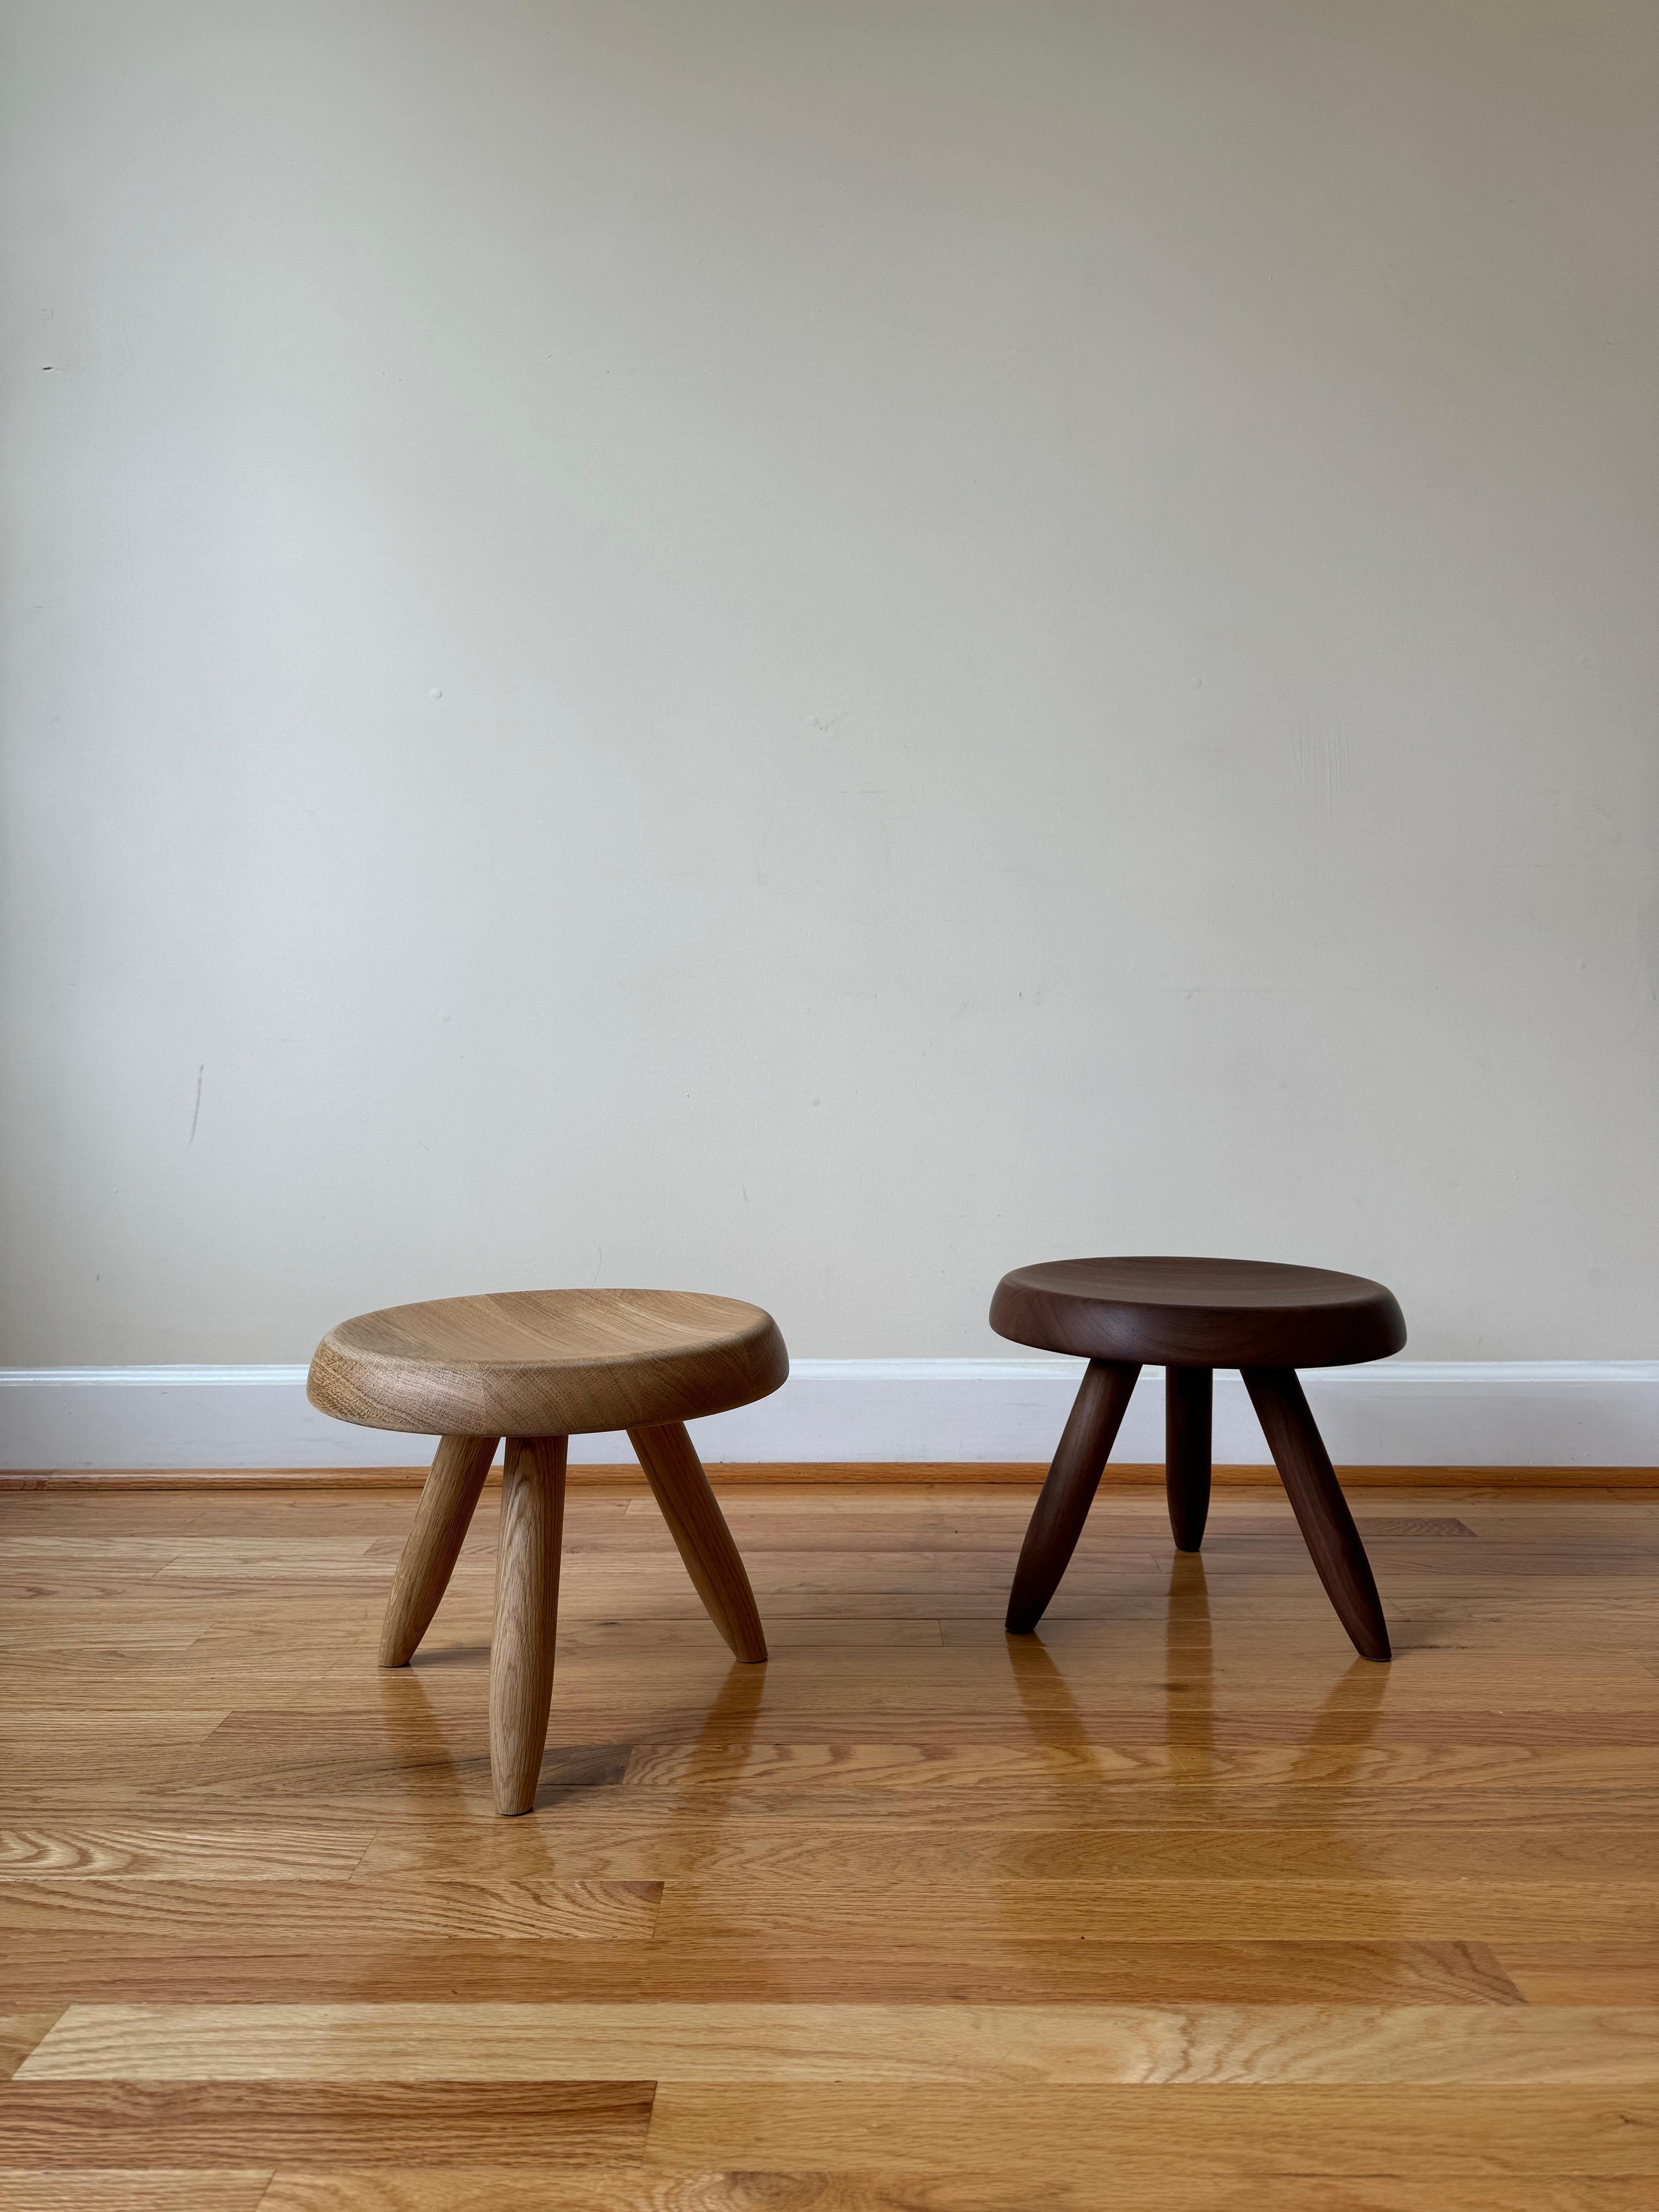 Tabouret Berger (Berger Stool) by Charlotte Perriand for Cassina For Sale 6